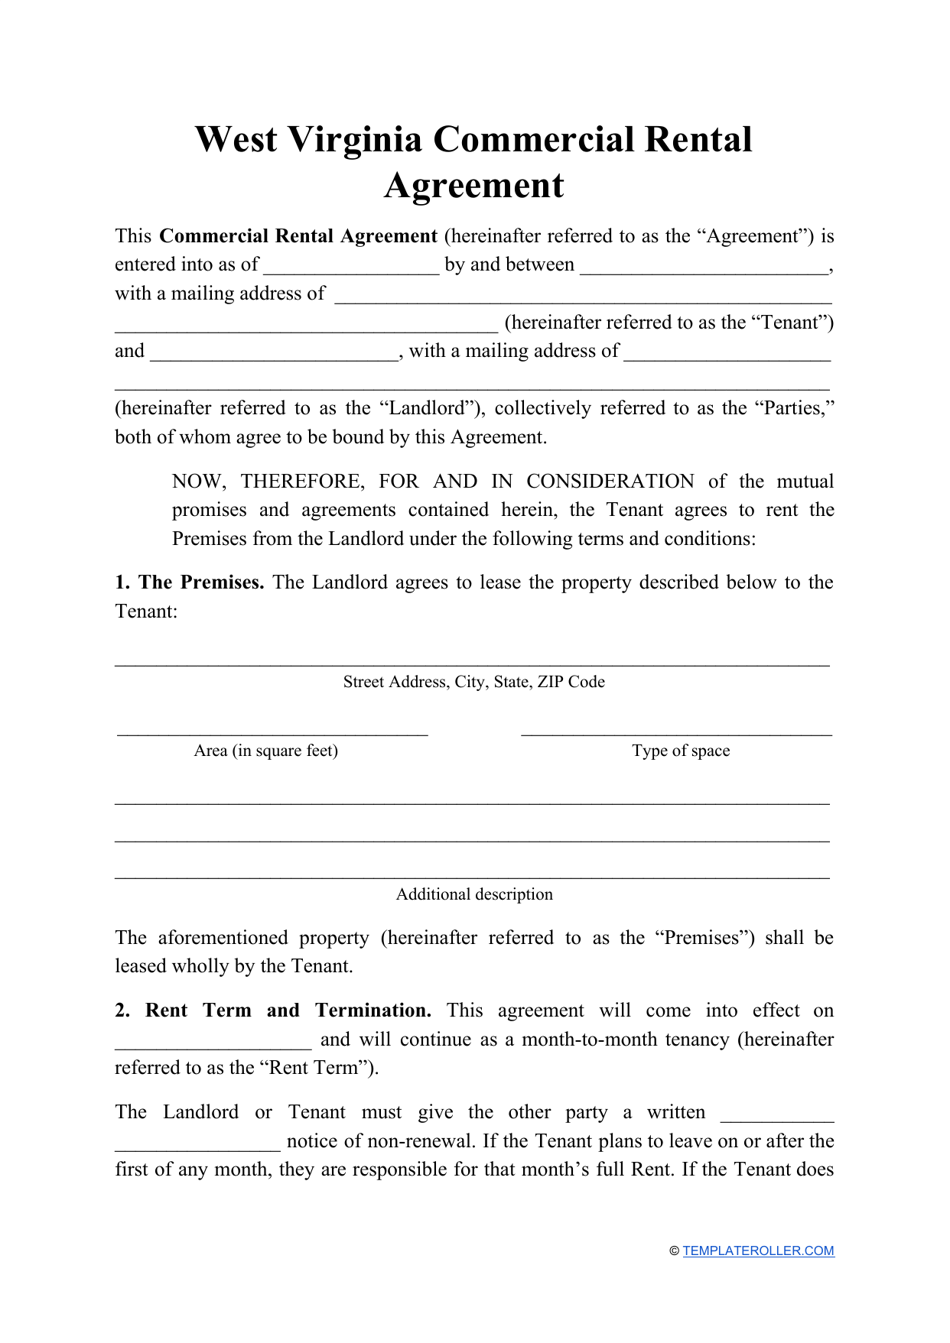 Commercial Rental Agreement Template - West Virginia, Page 1